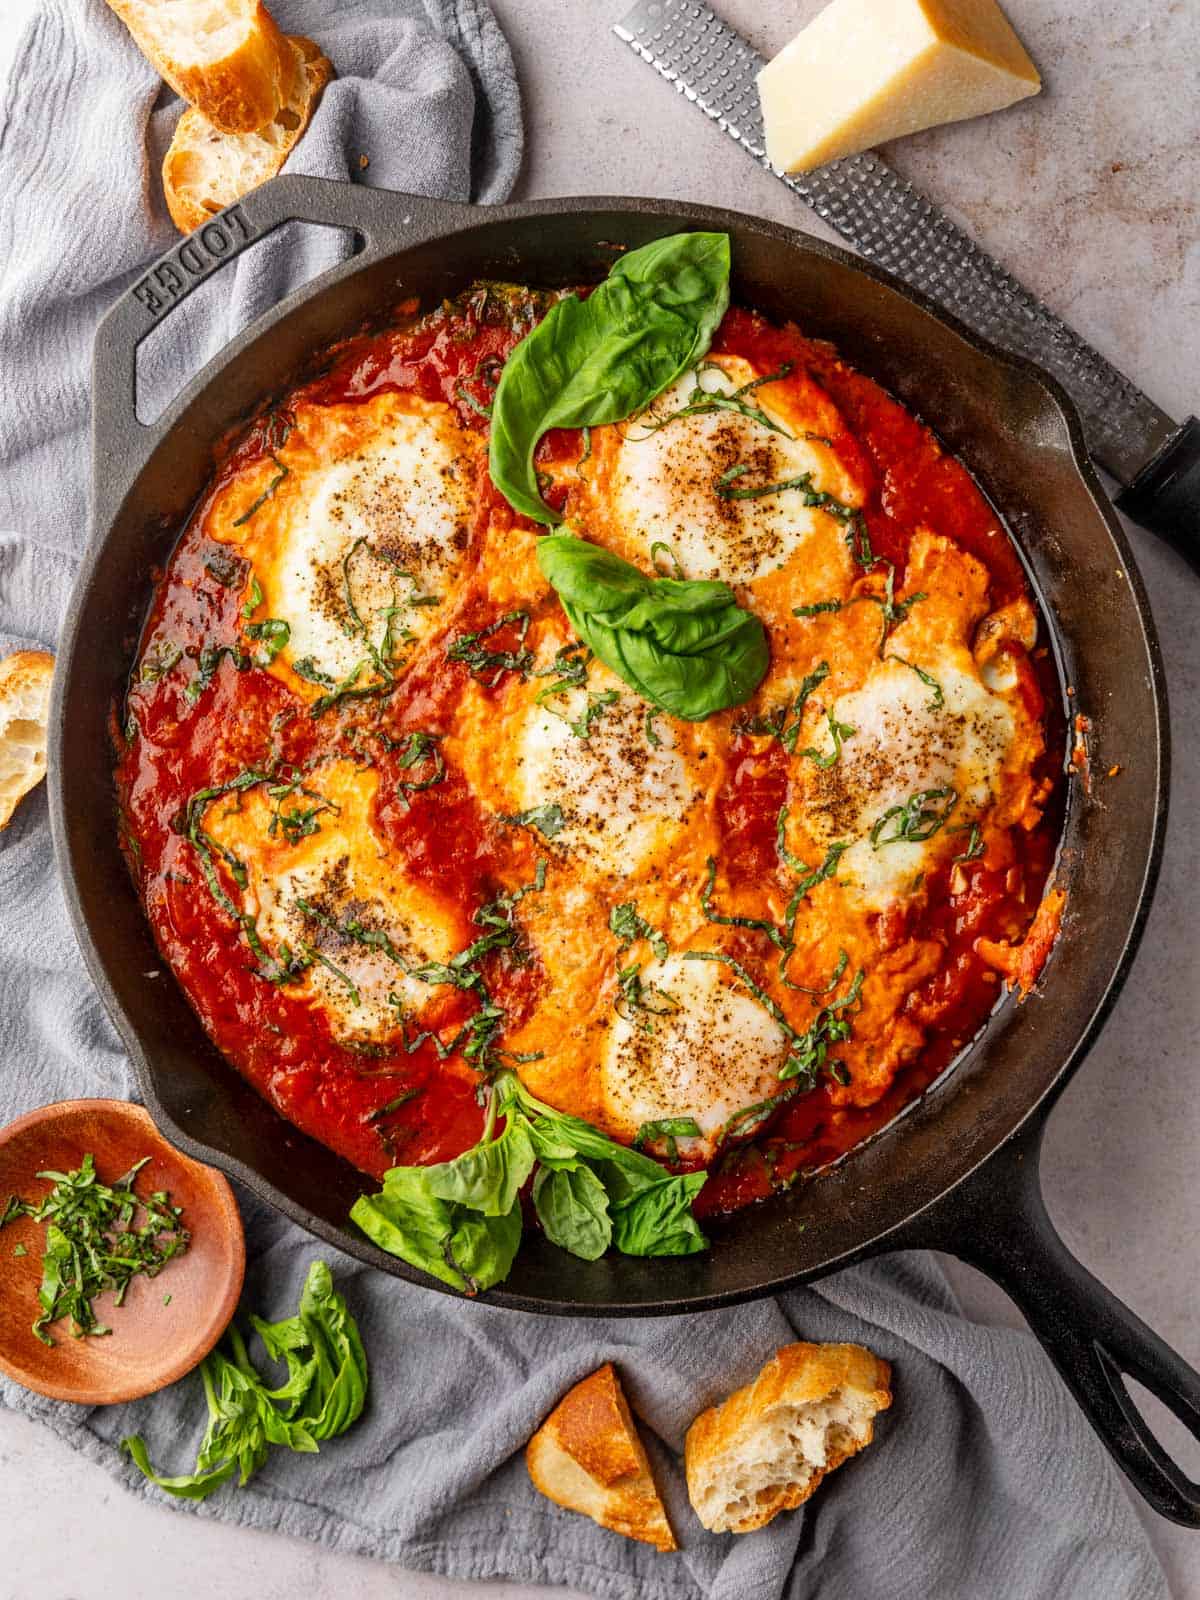 eggs baked in red sauce with in a cast iron skillet with sliced bread around it. 